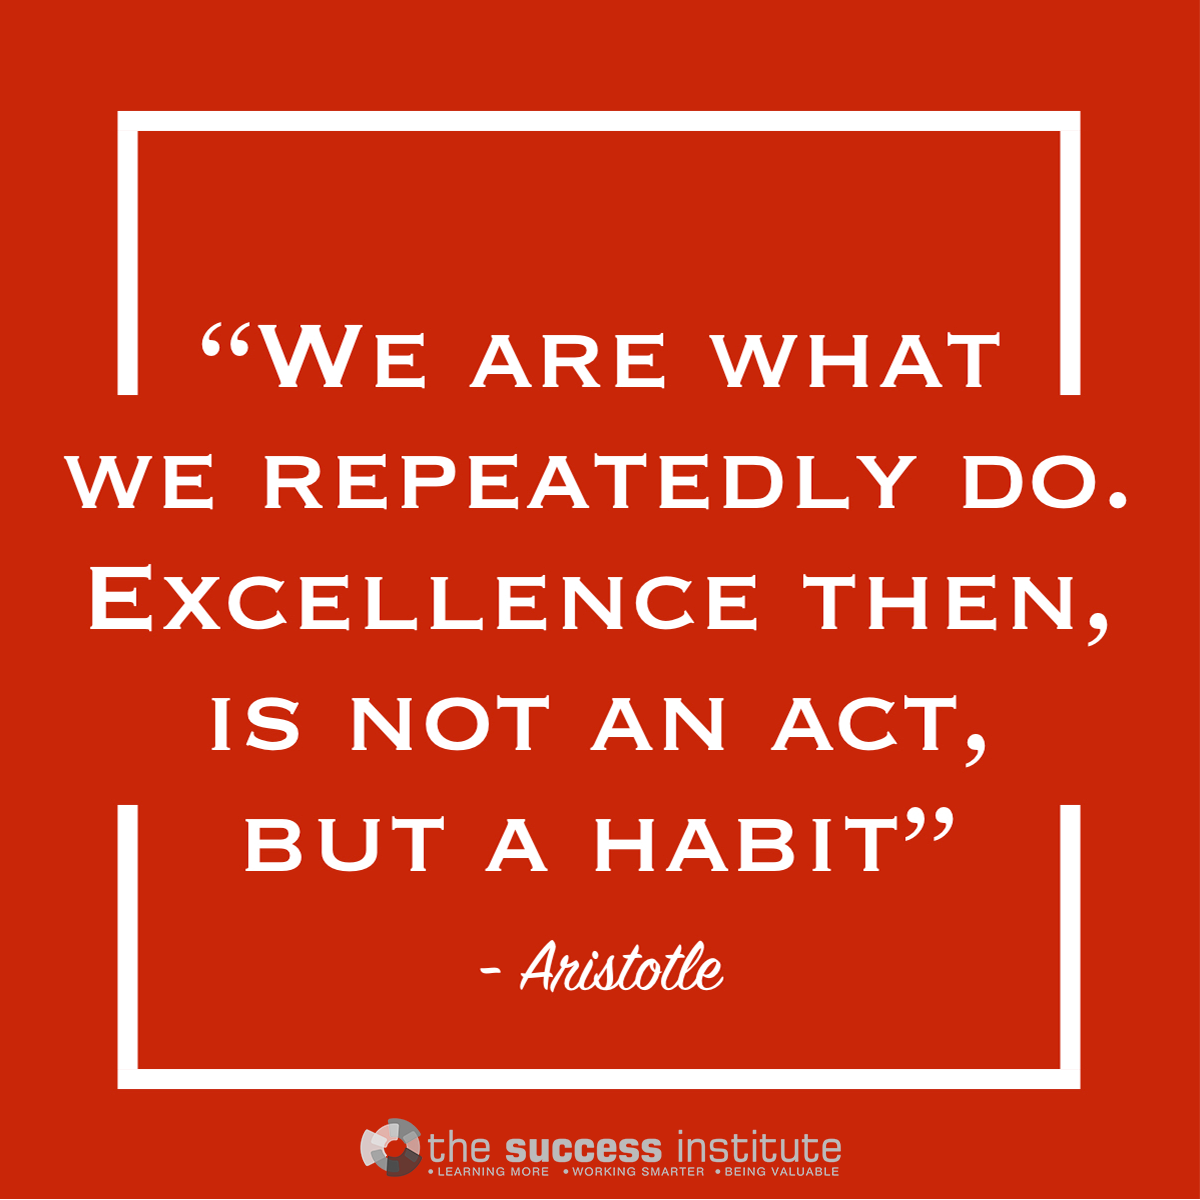 We are what we repeatedly do.